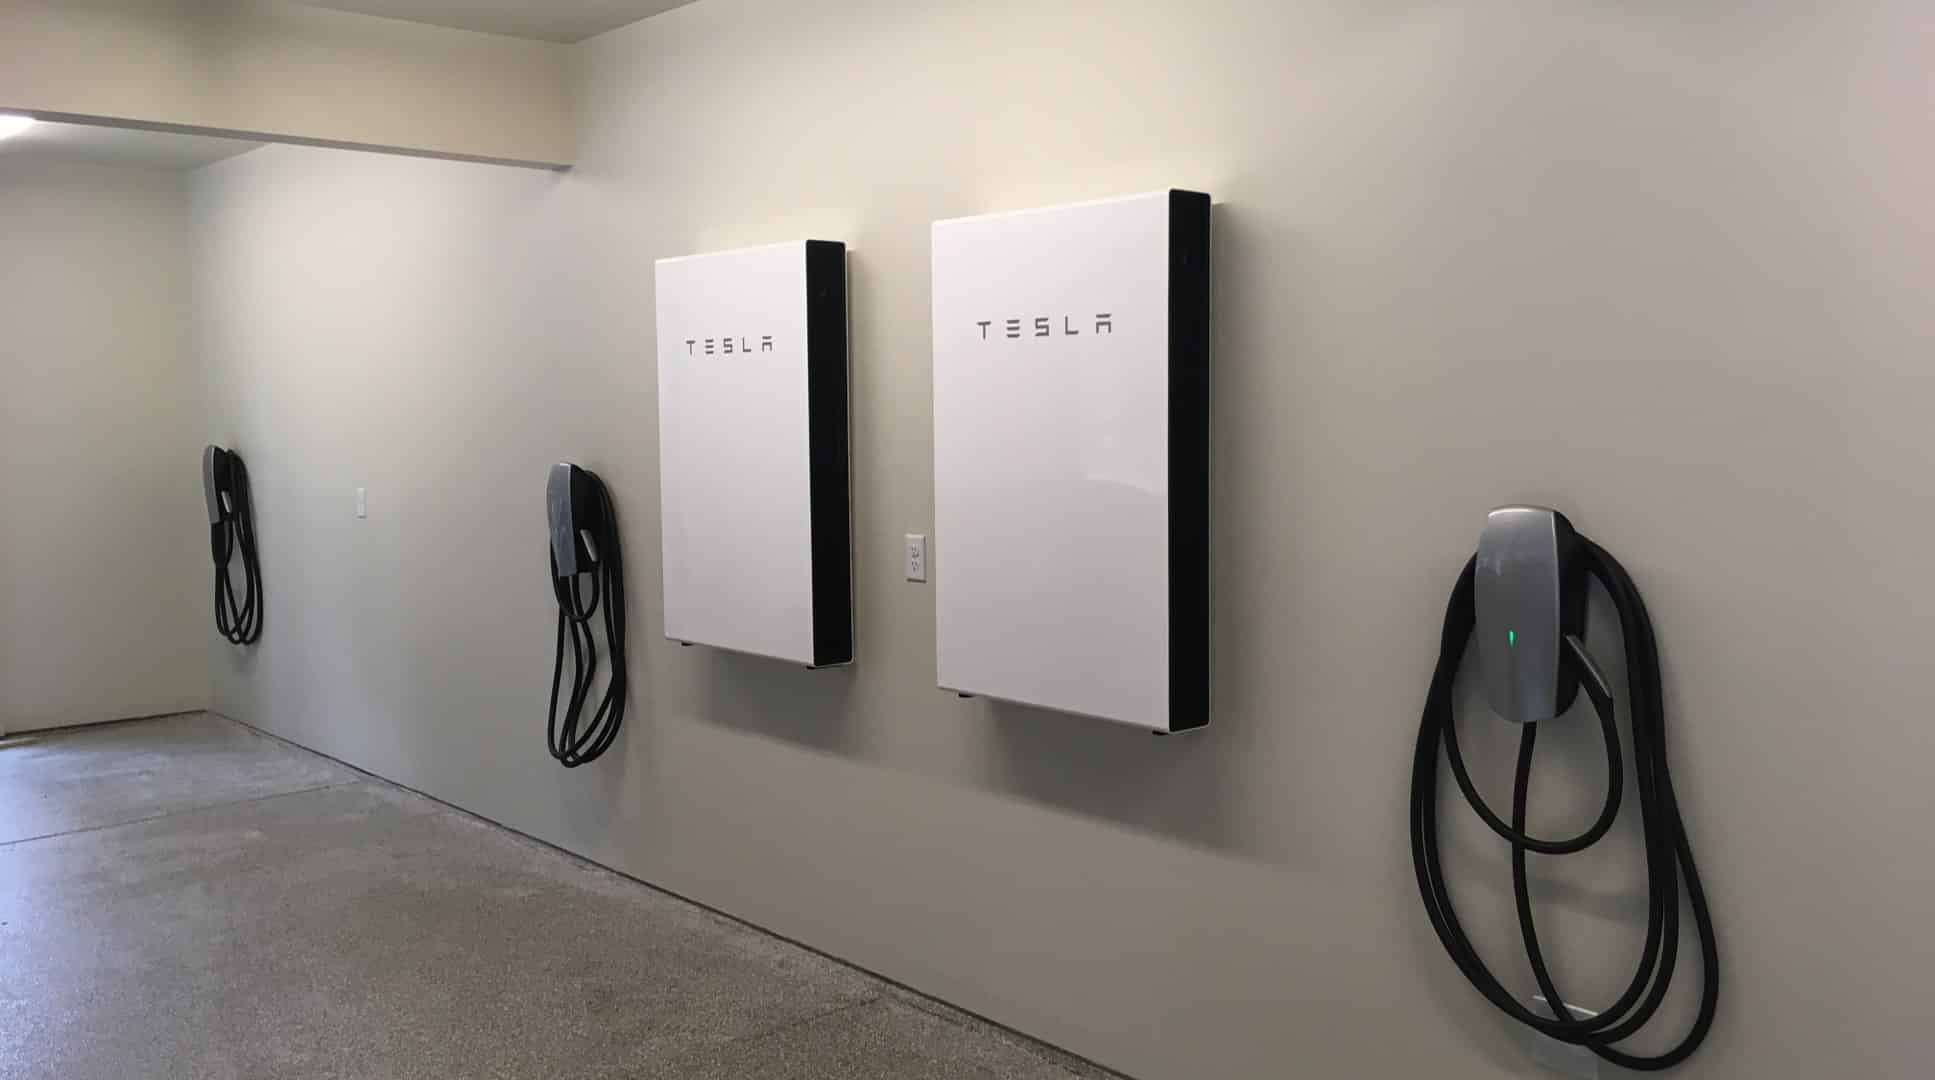 Tesla powerwall and EV charger